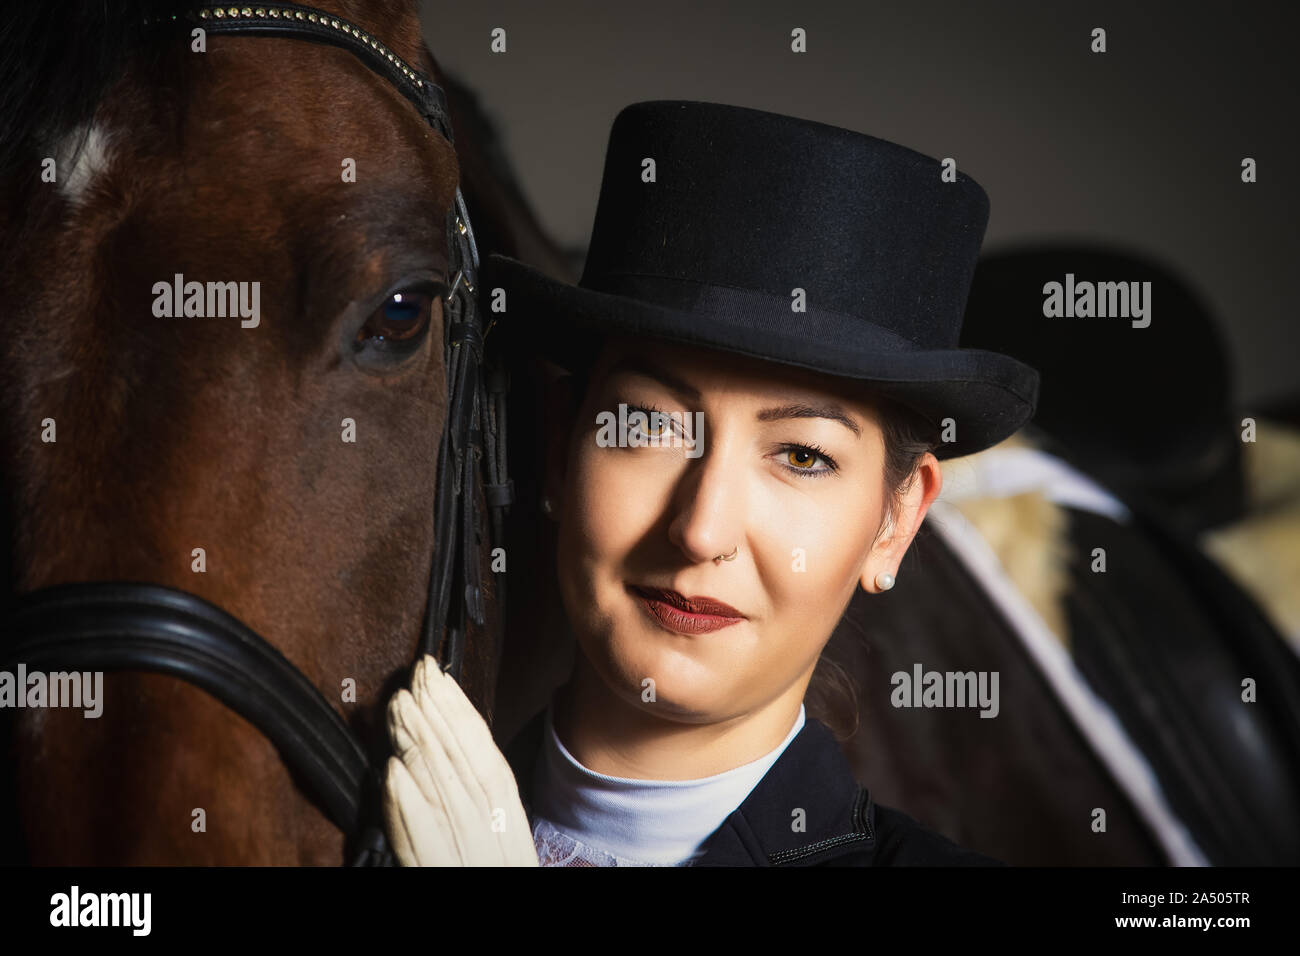 Young woman in tails in portraits next to her horse. She is holding her head next to the one of the horse and is looking into the camera. Stock Photo